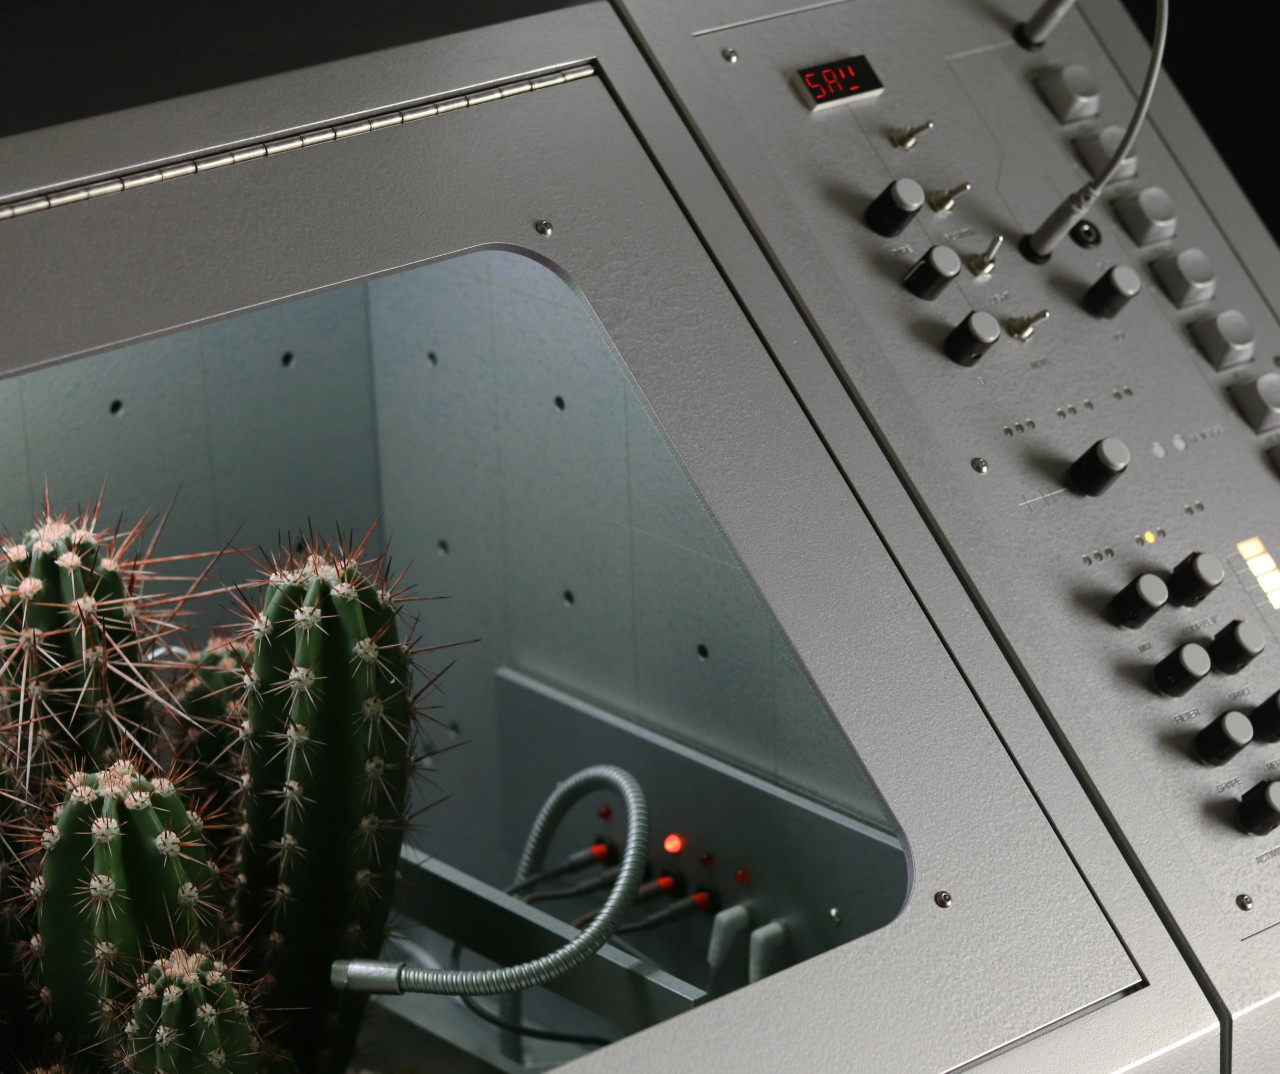 This strange-looking plant box uses science to create eerie music